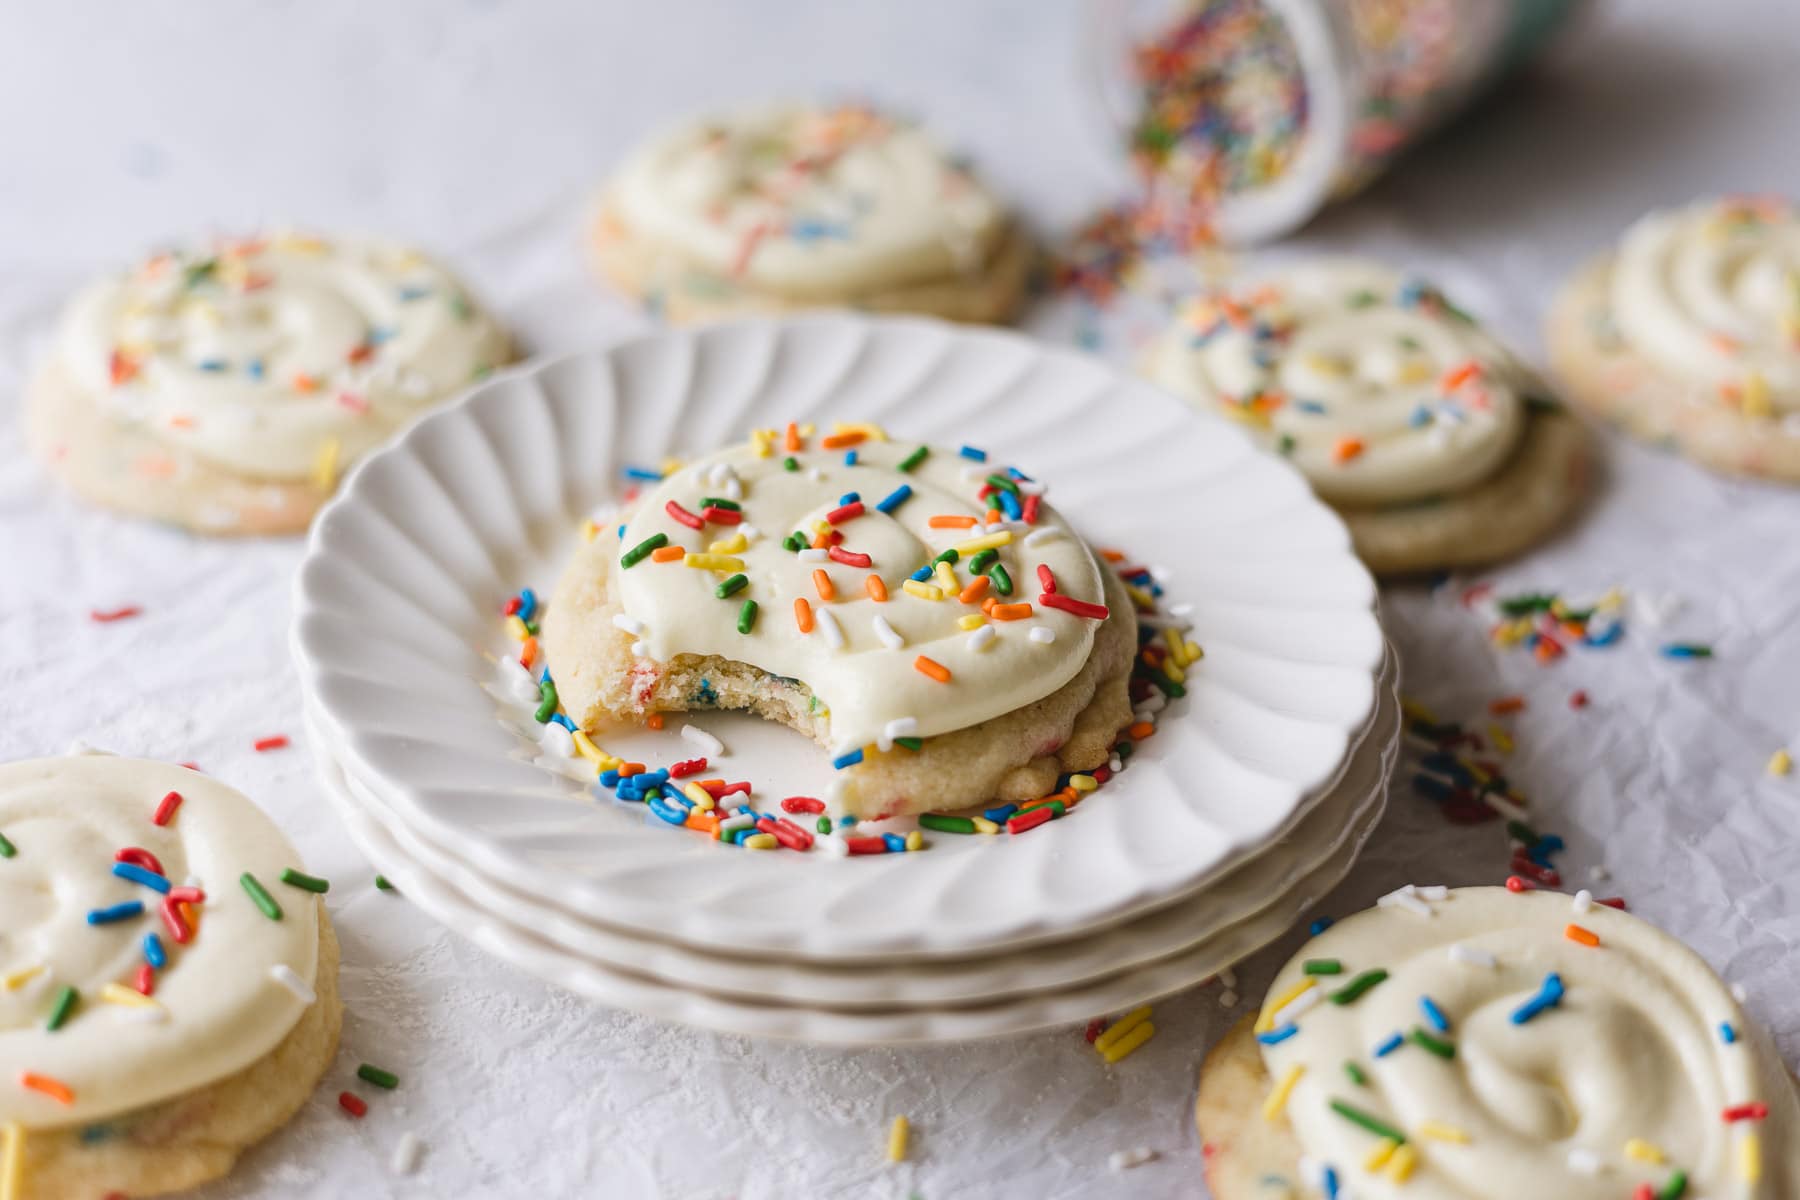 A Crumbl Funfetti Copycat cookie with a bite removed on a stack of plates.